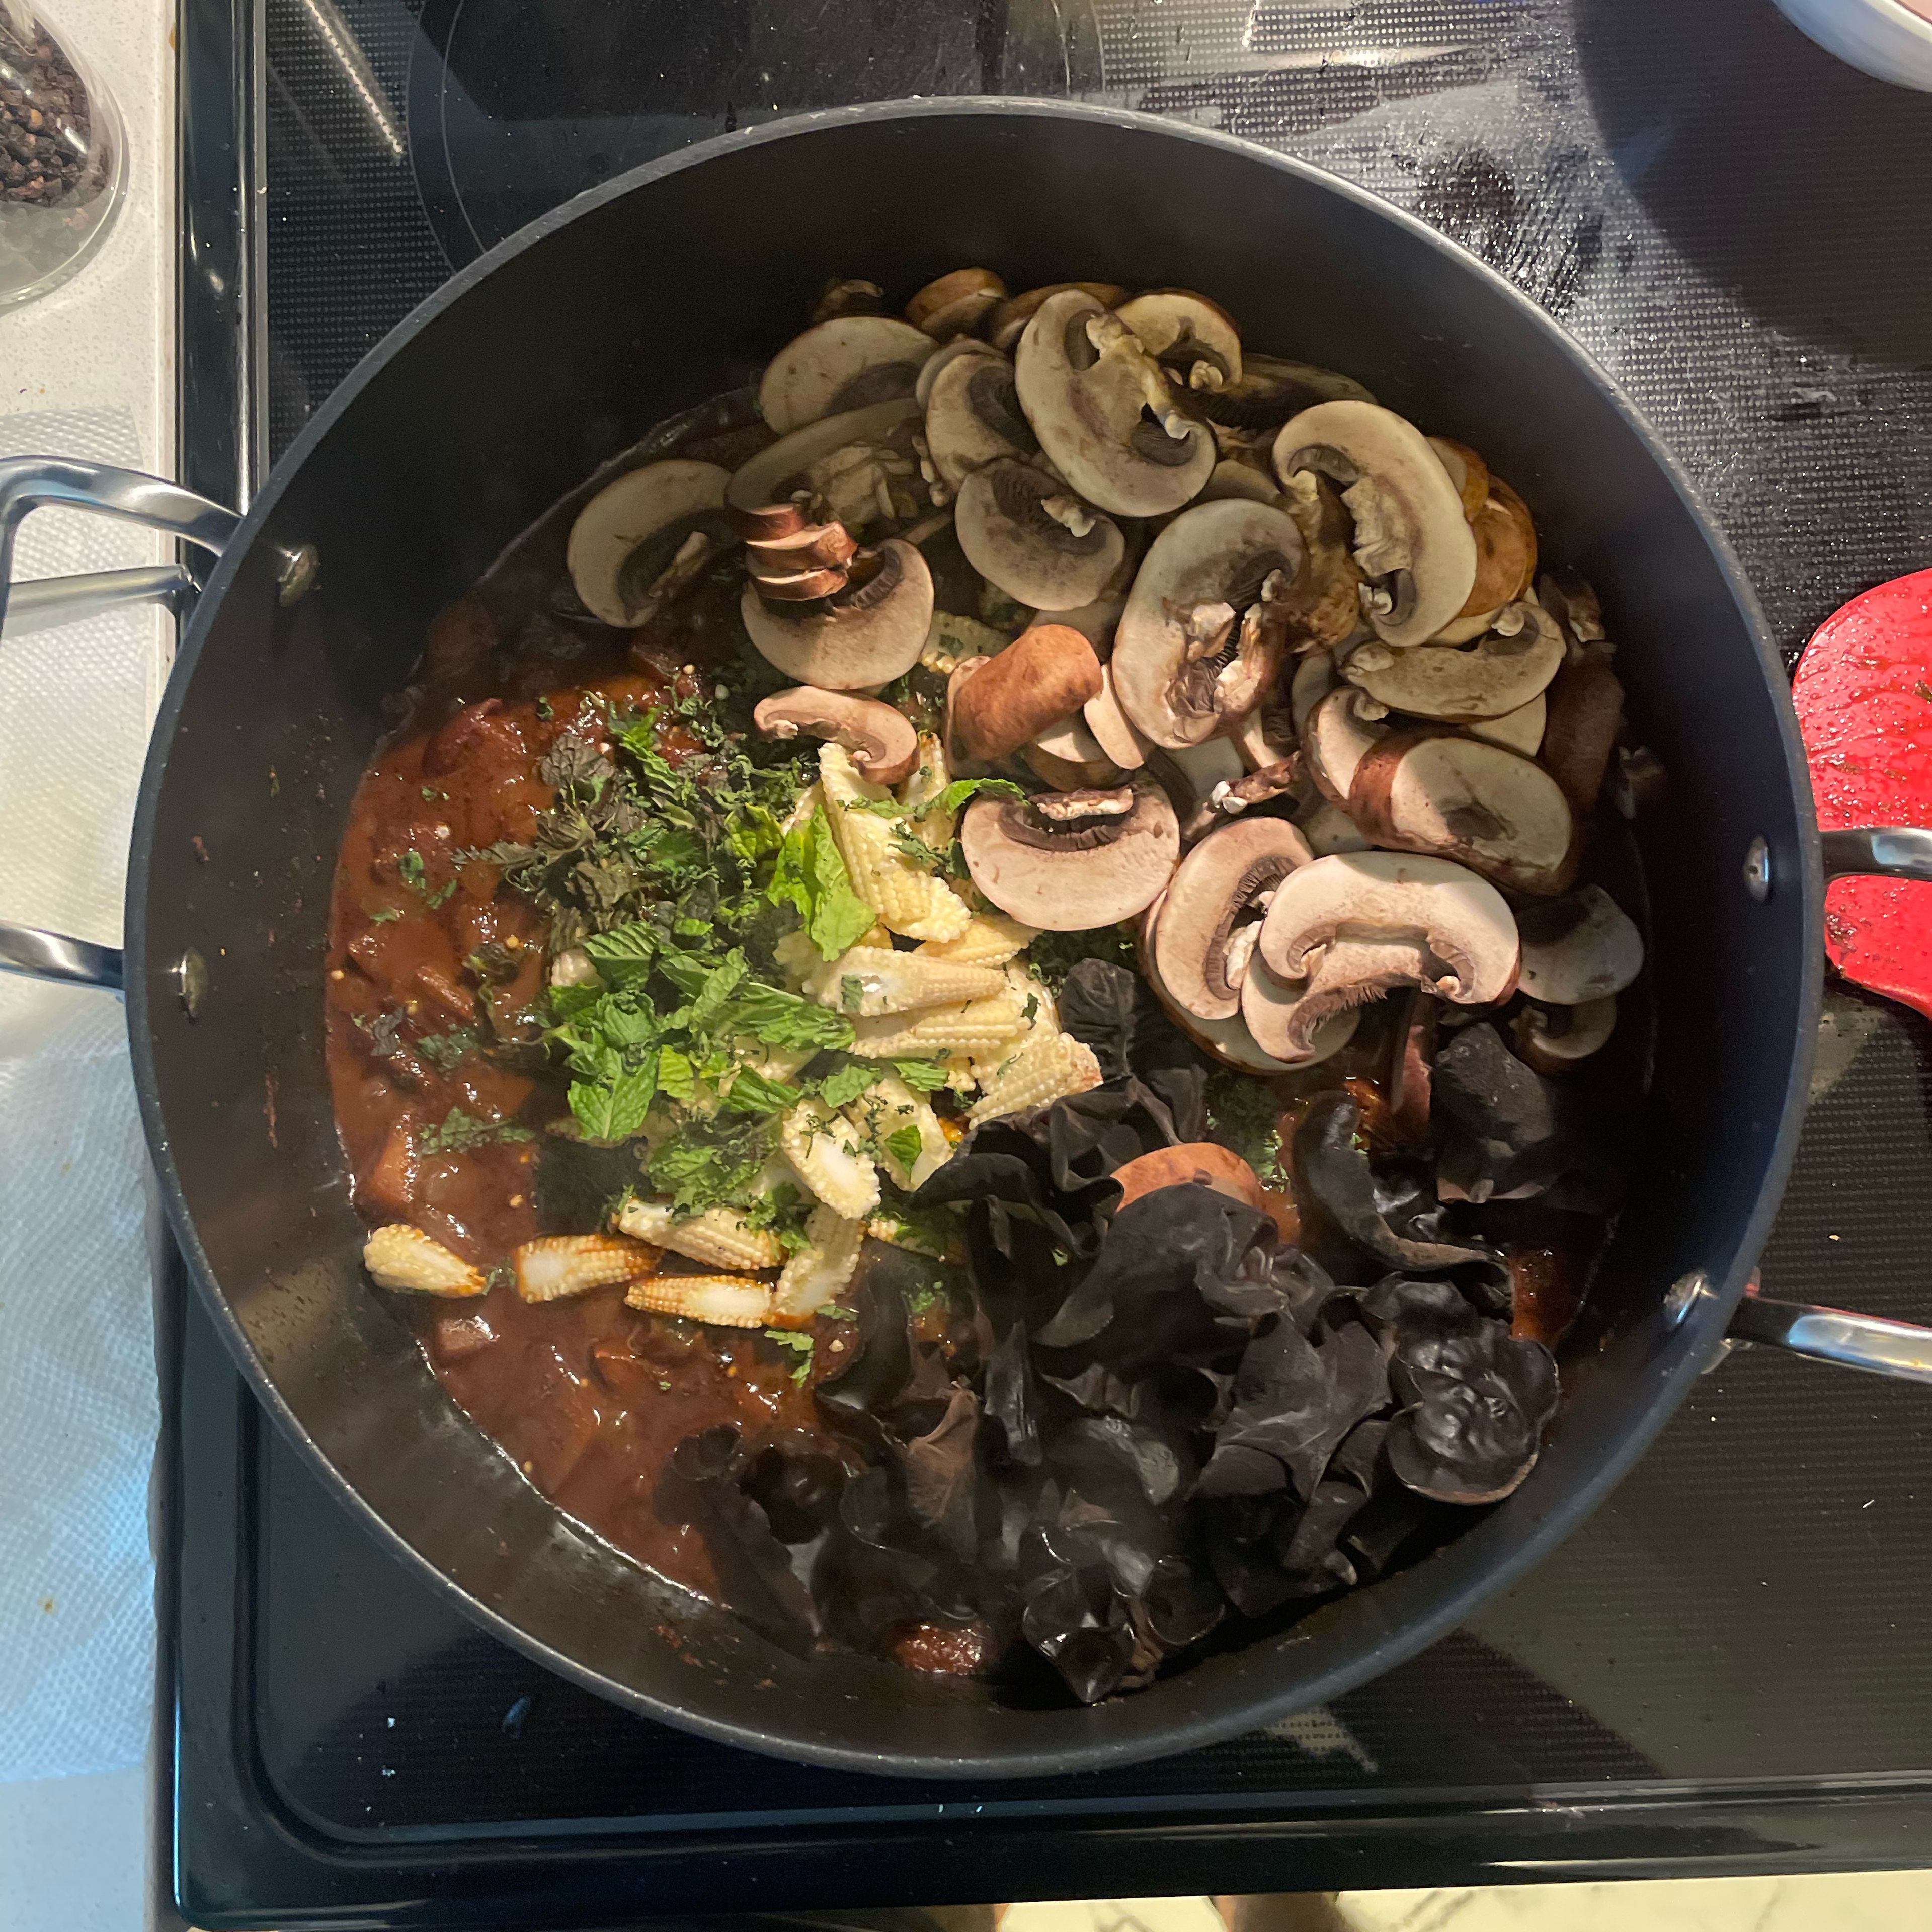 Add baby corn. Mushrooms. Mint. And Cilantro. Cook time: 7-12mins at med-high flame. 